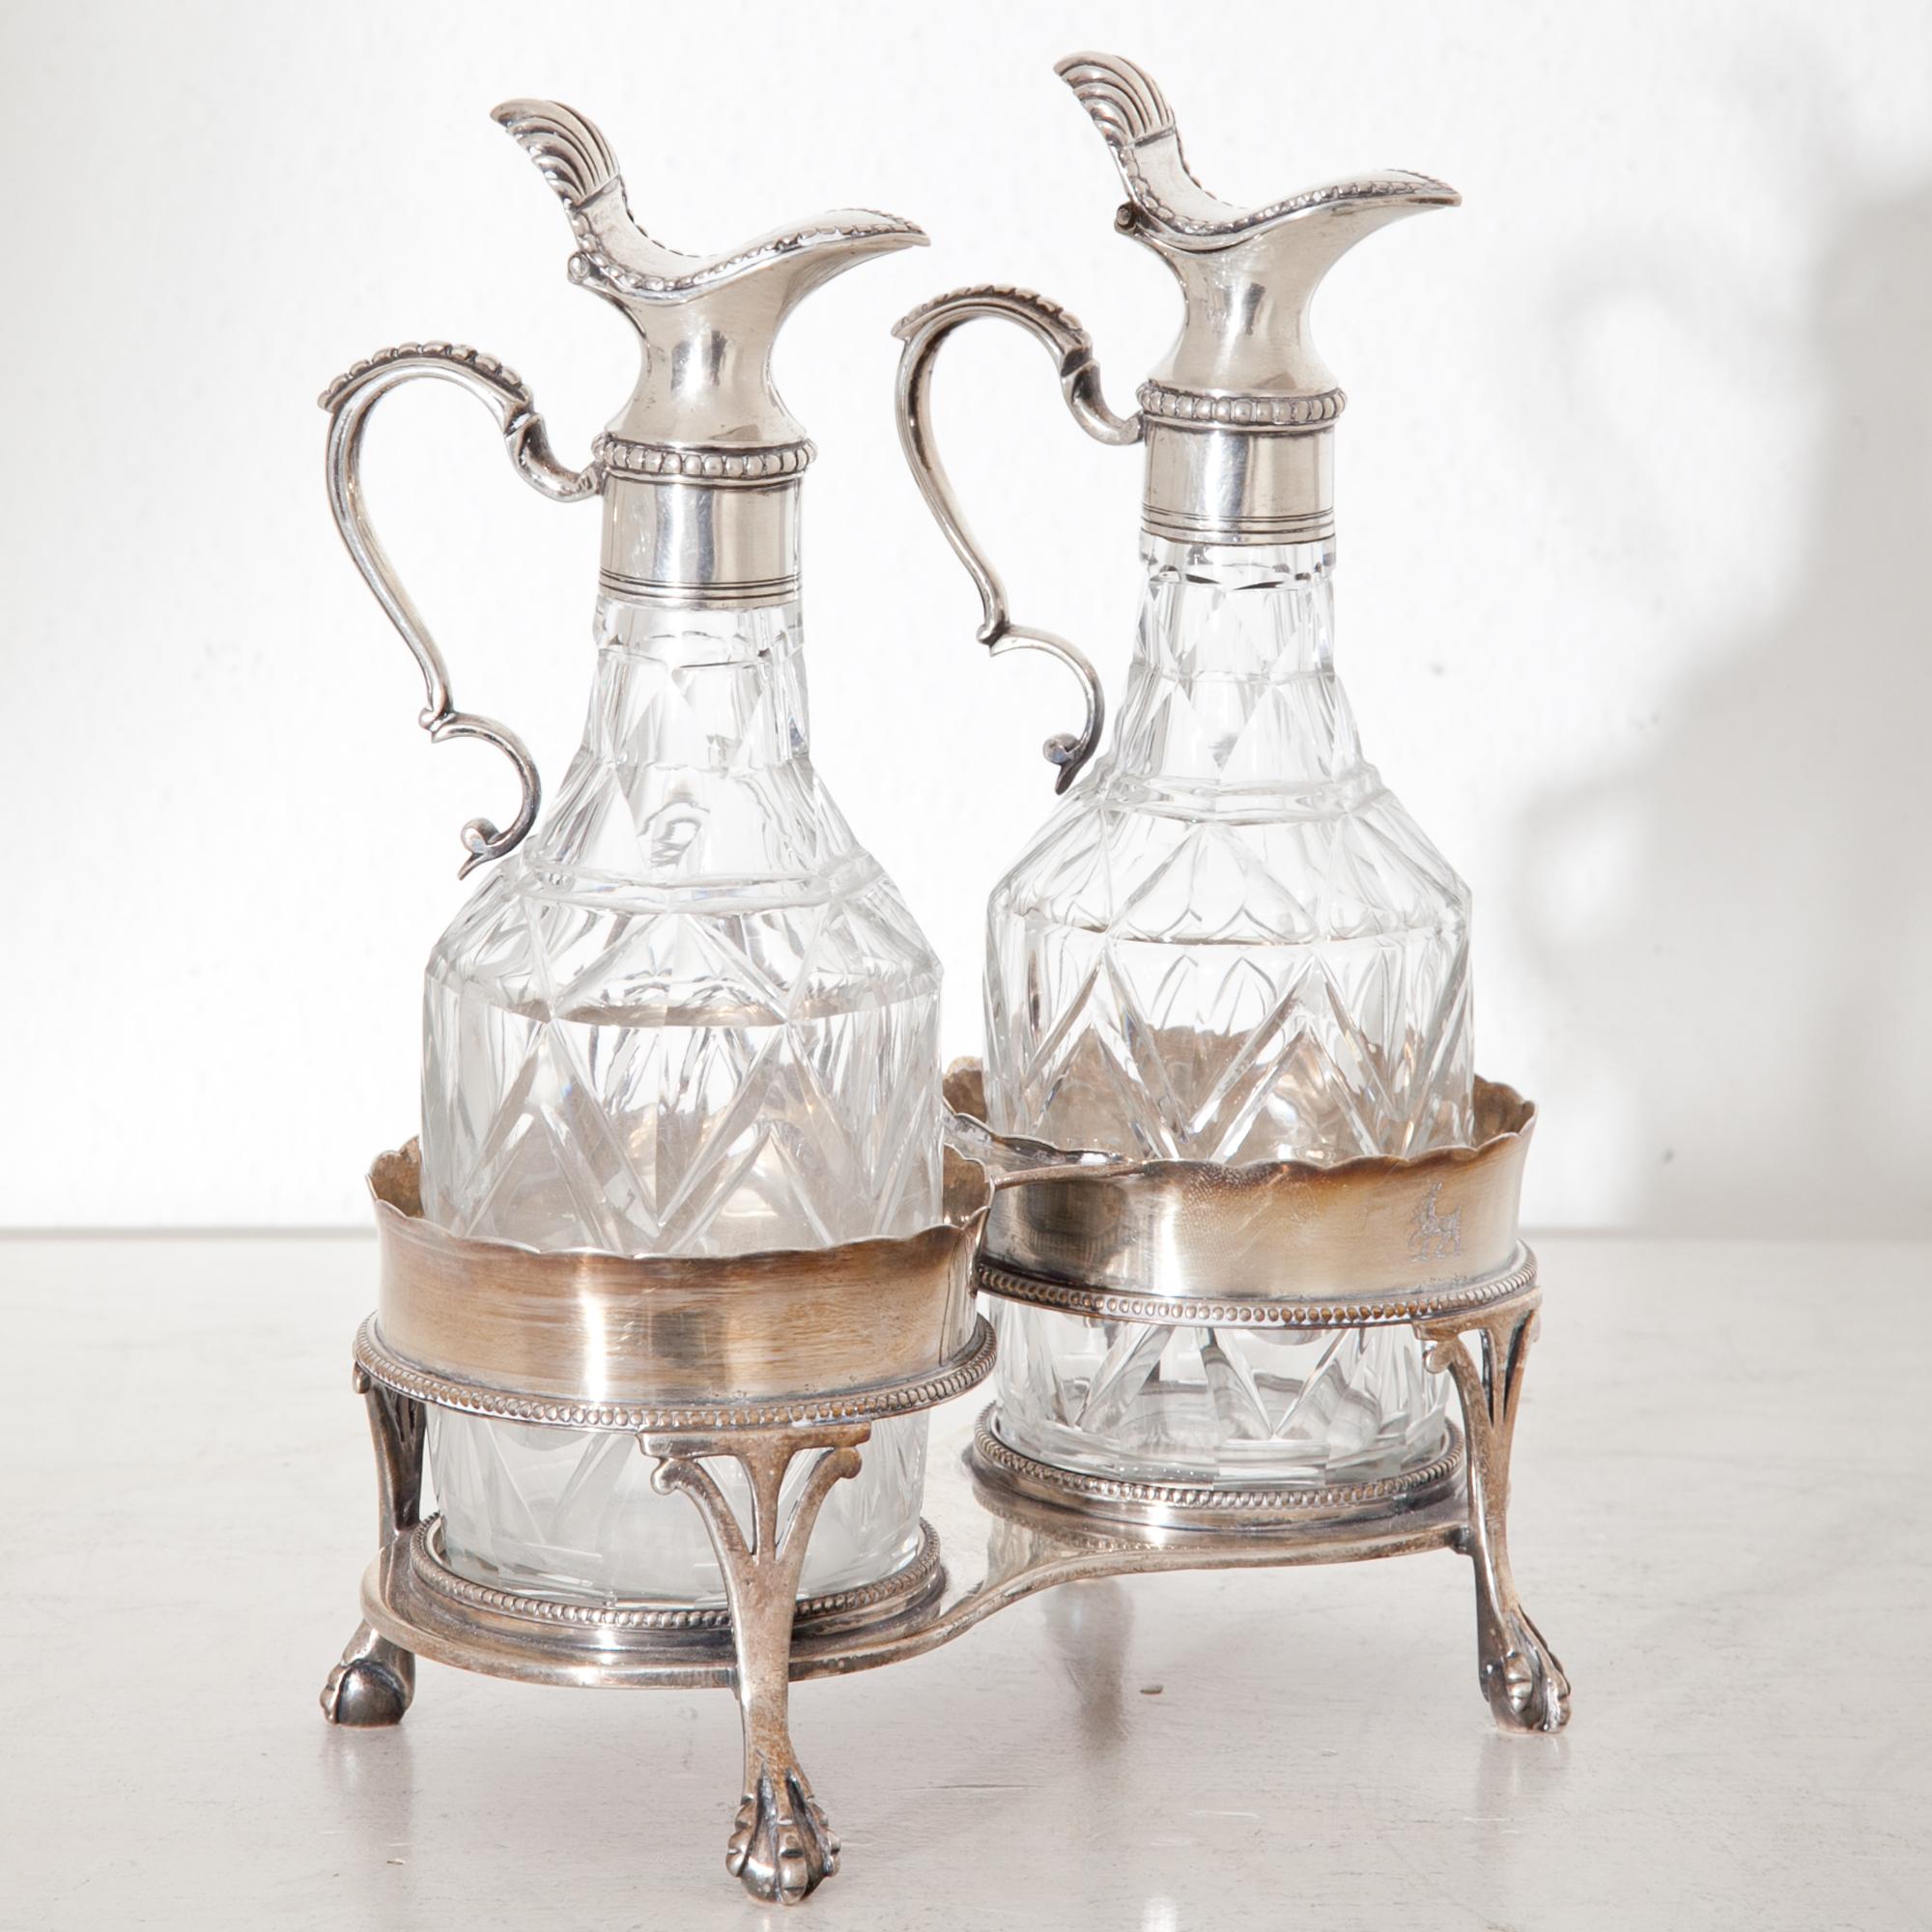 Menagerie for Oil and Vinegar, Silver and Glass, England, circa 1770 For Sale 3